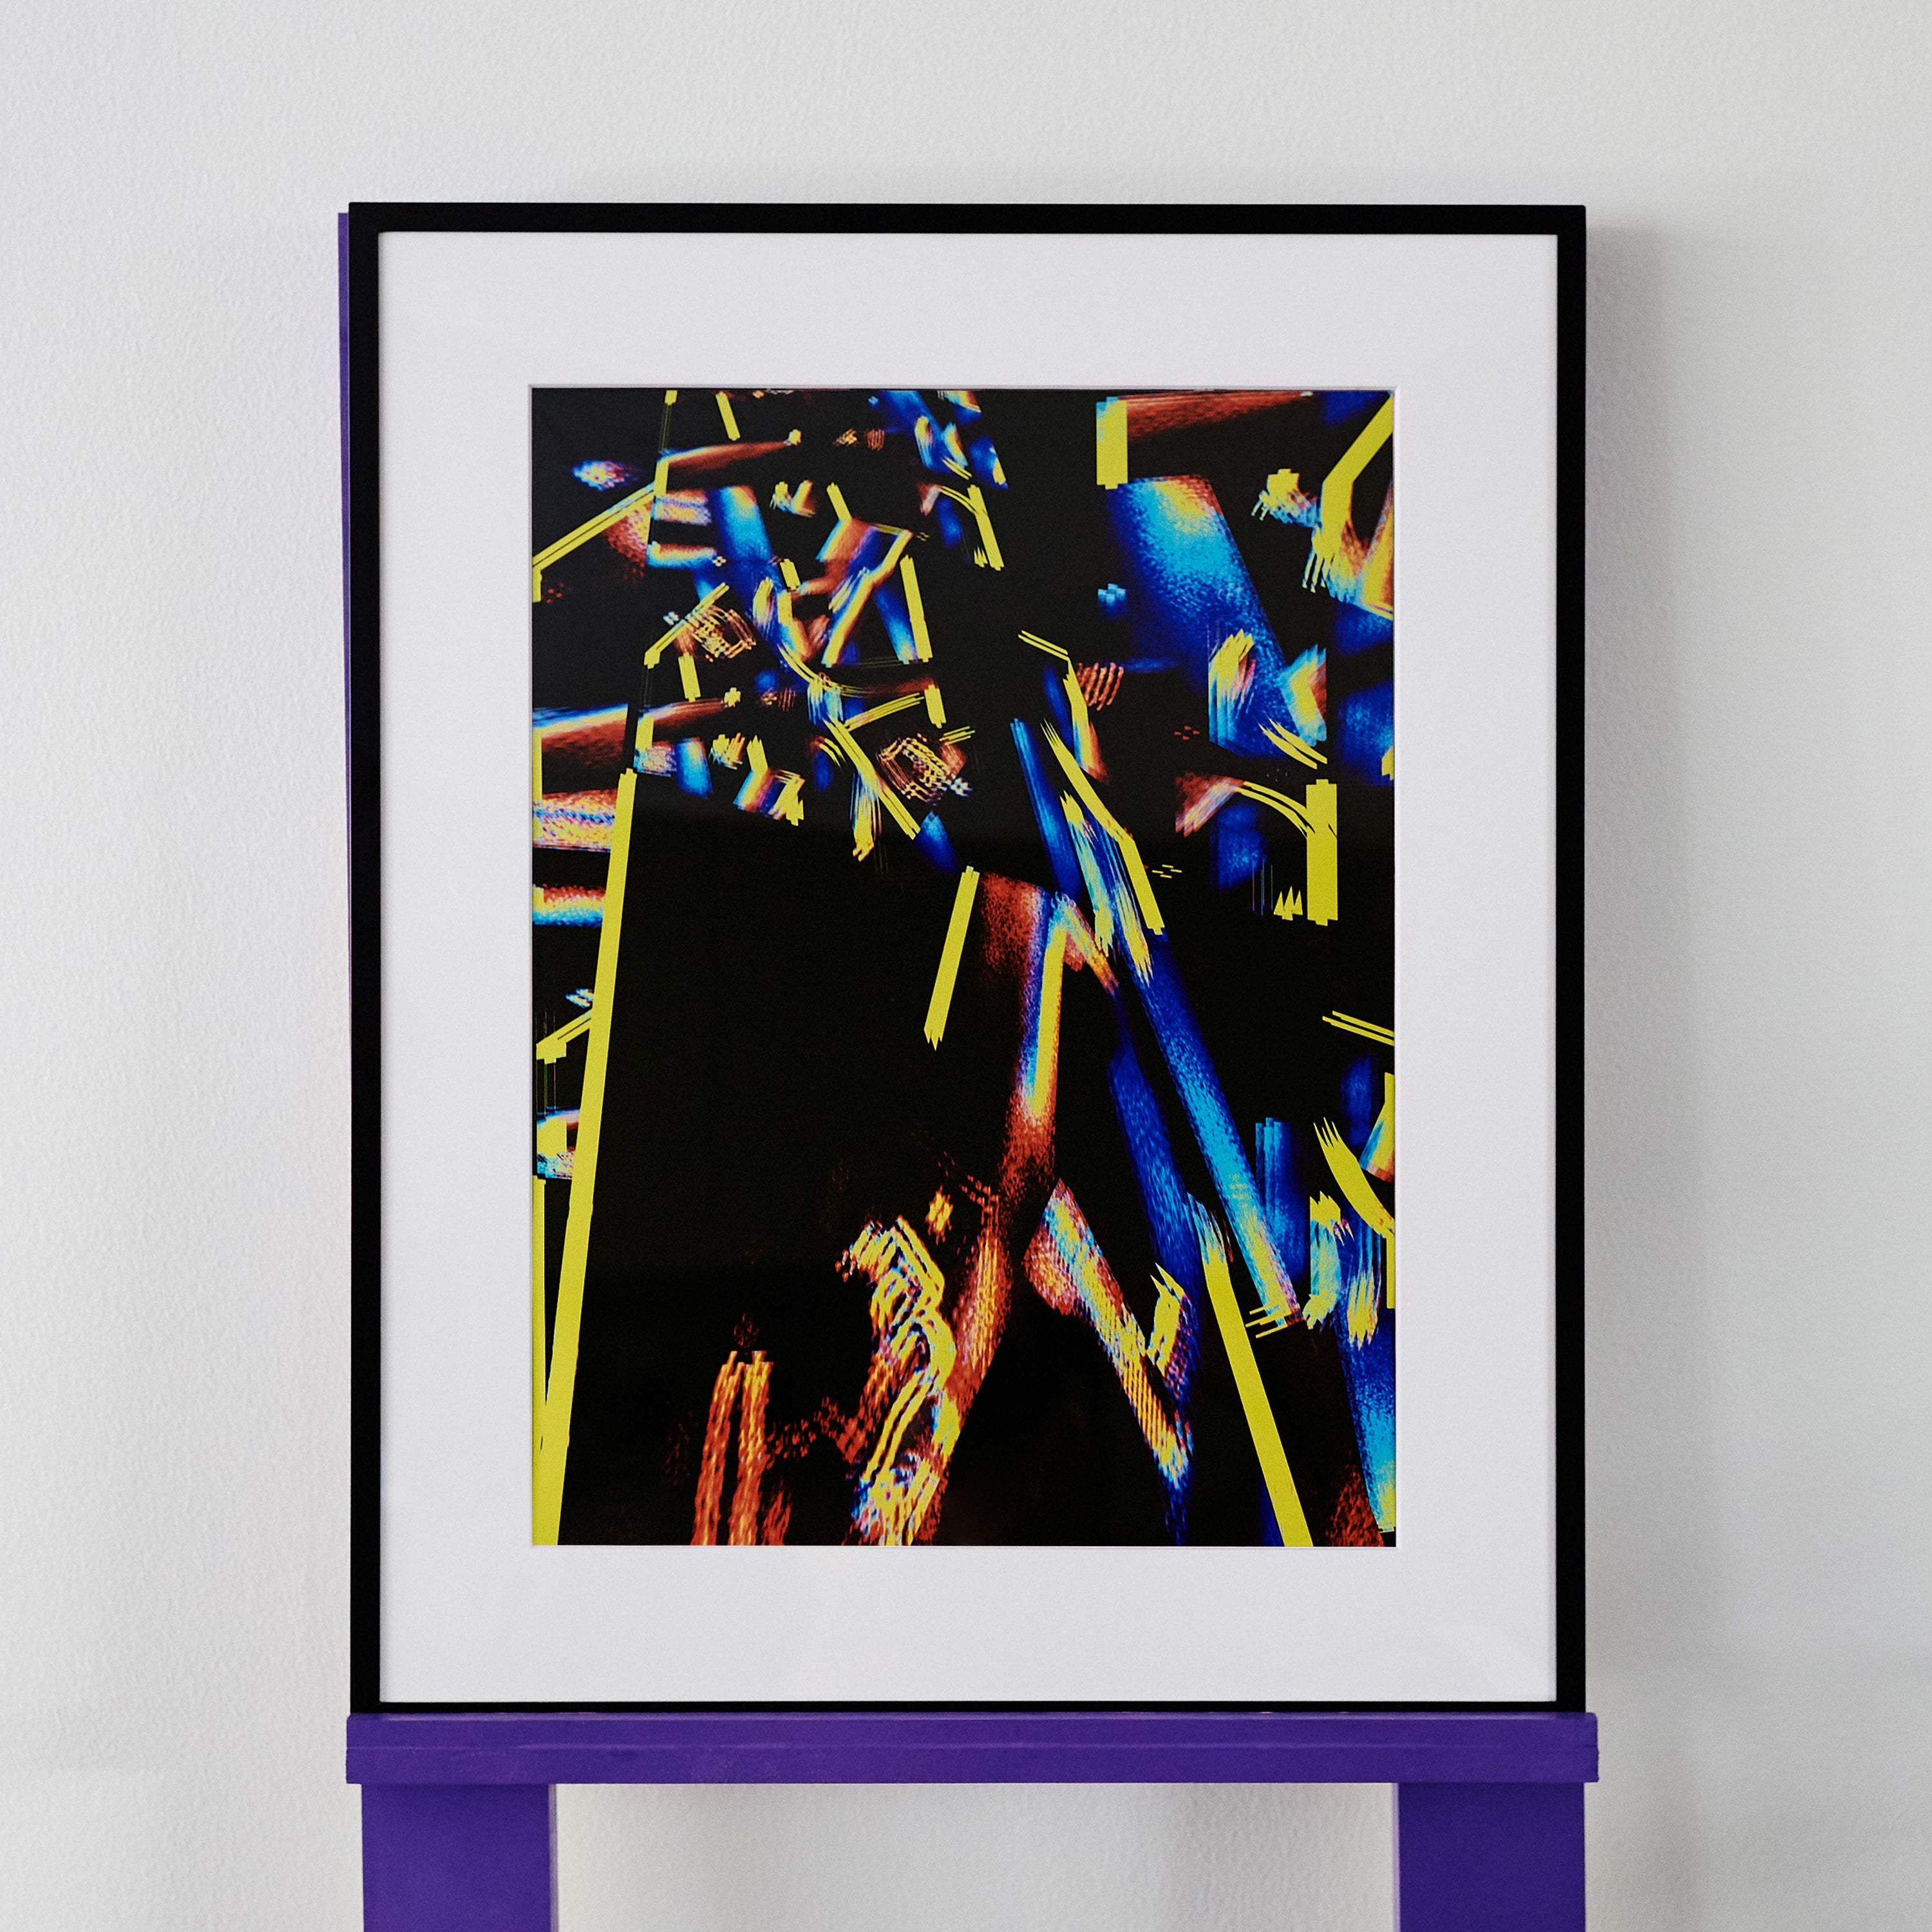 wa sei's abstract artwork 'zzaJ' is composed of vibrant hues of electric blue, yellow and red on a black background. The original artwork is displayed in a black frame.